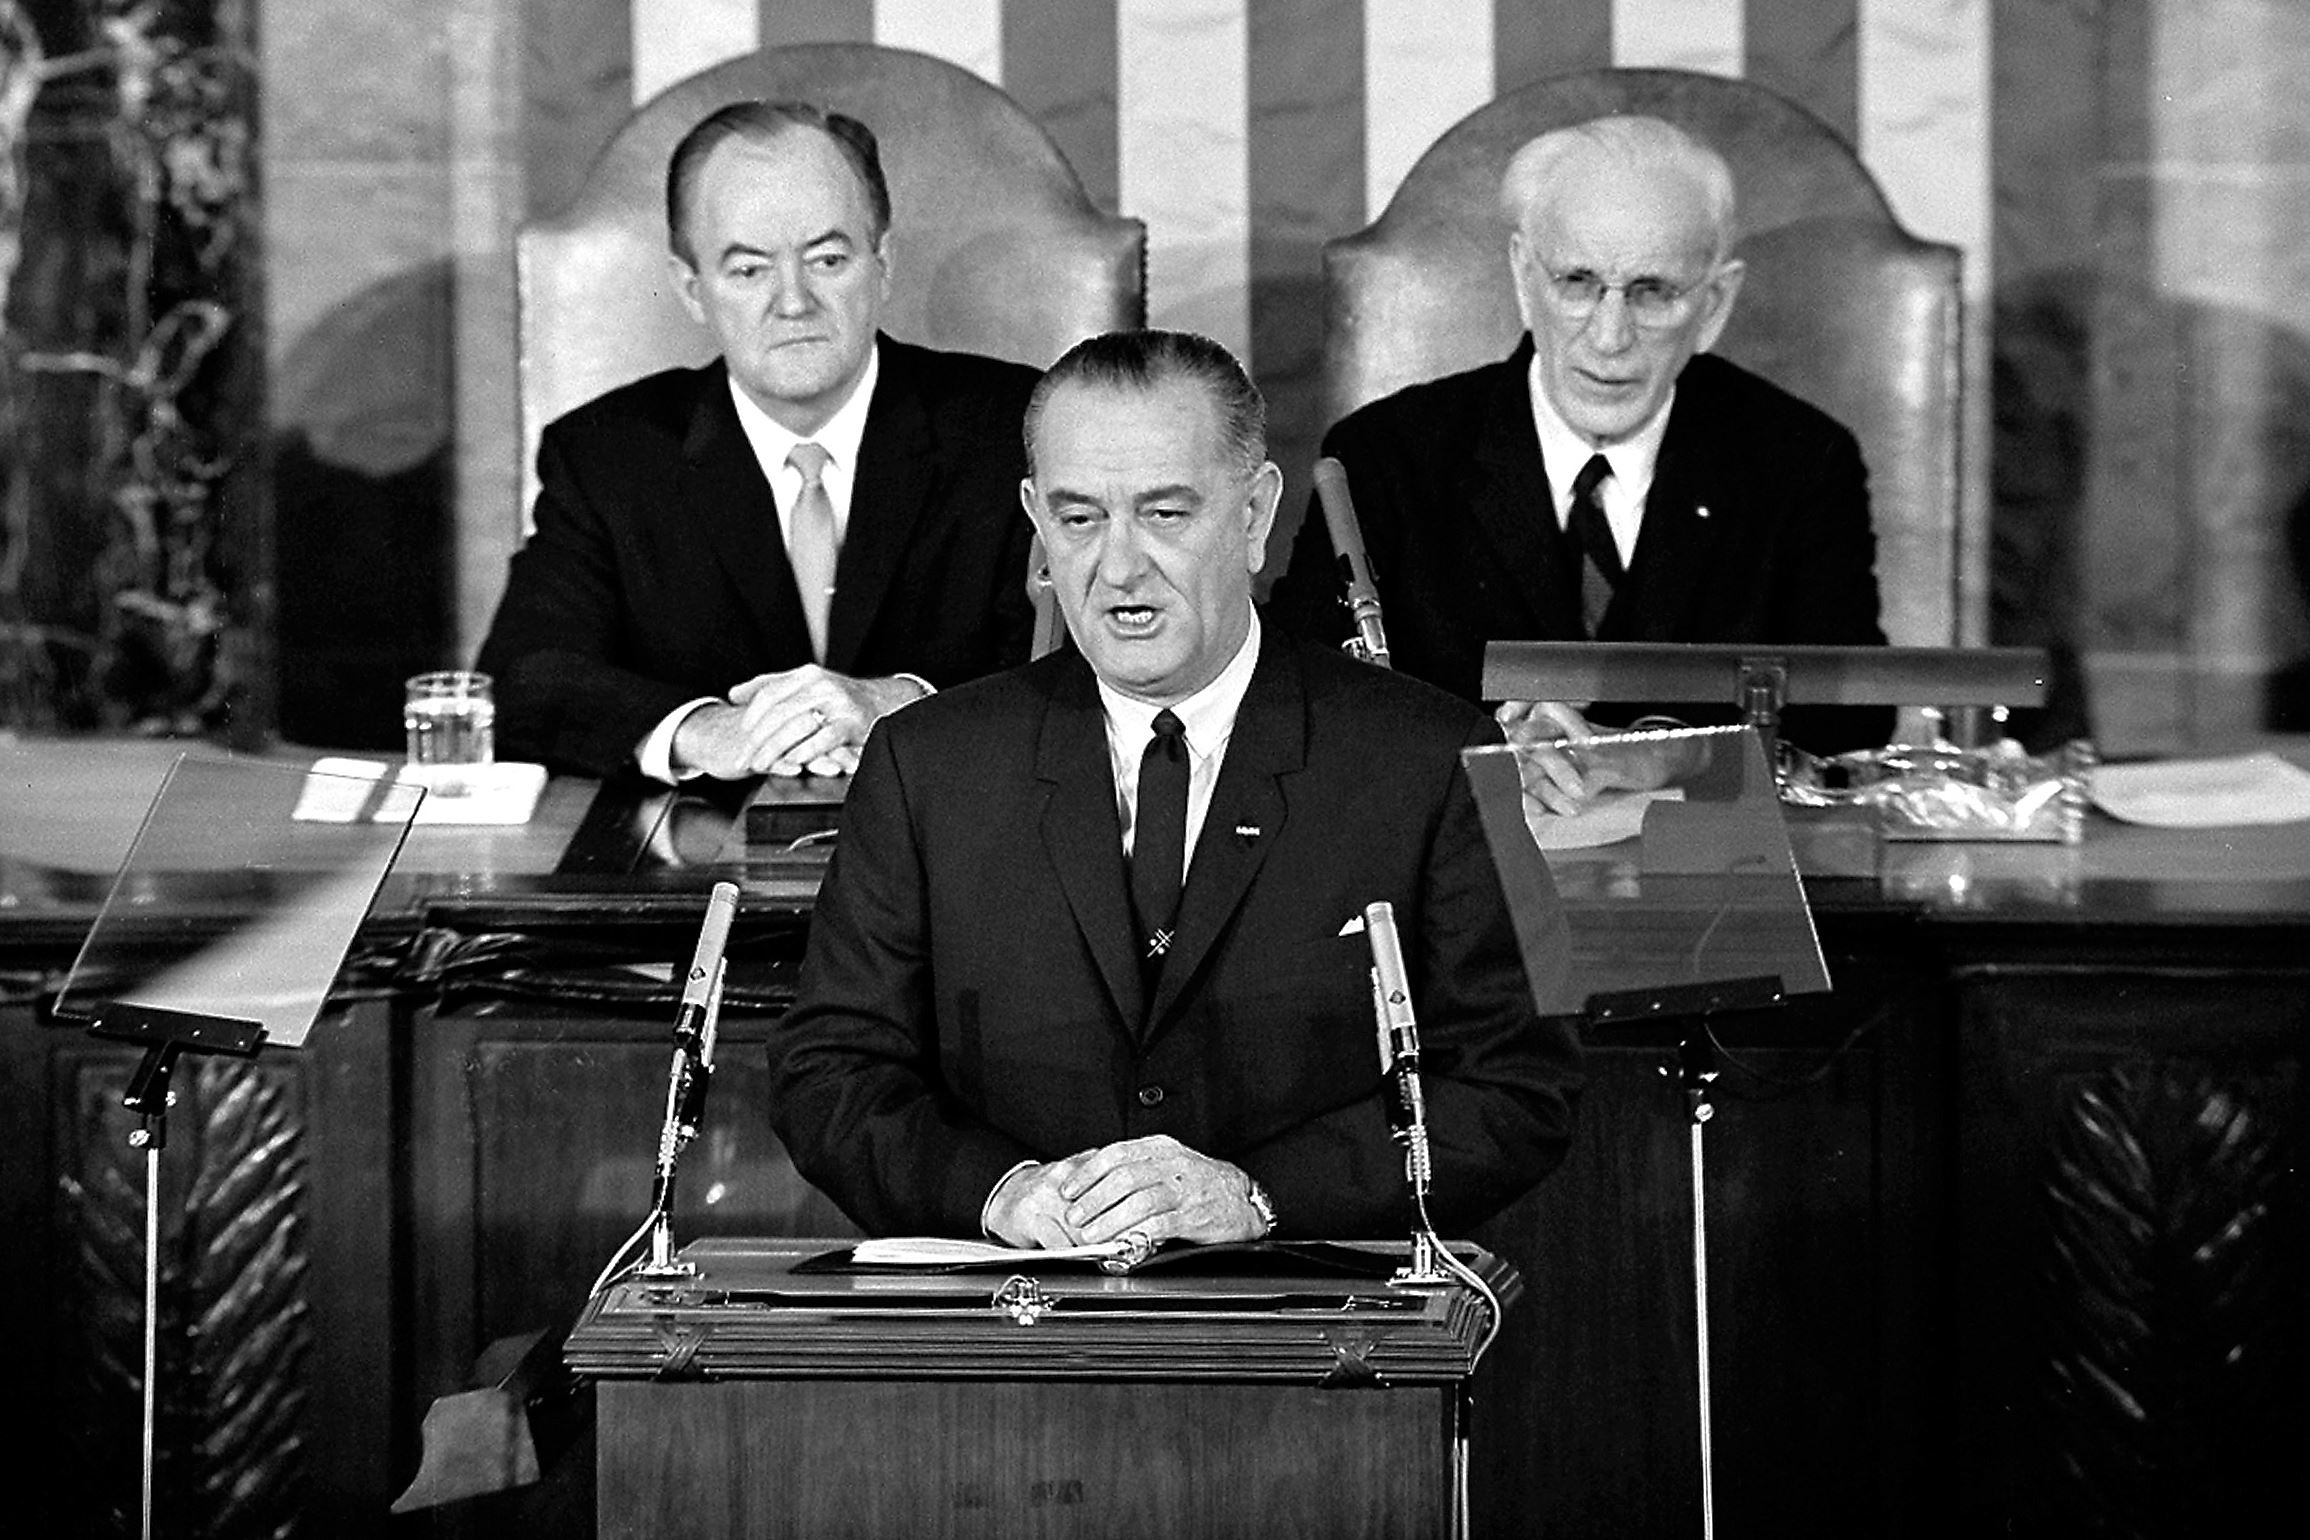    A great speech turns 50: LBJ's eloquent call for voting rights came together quickly

